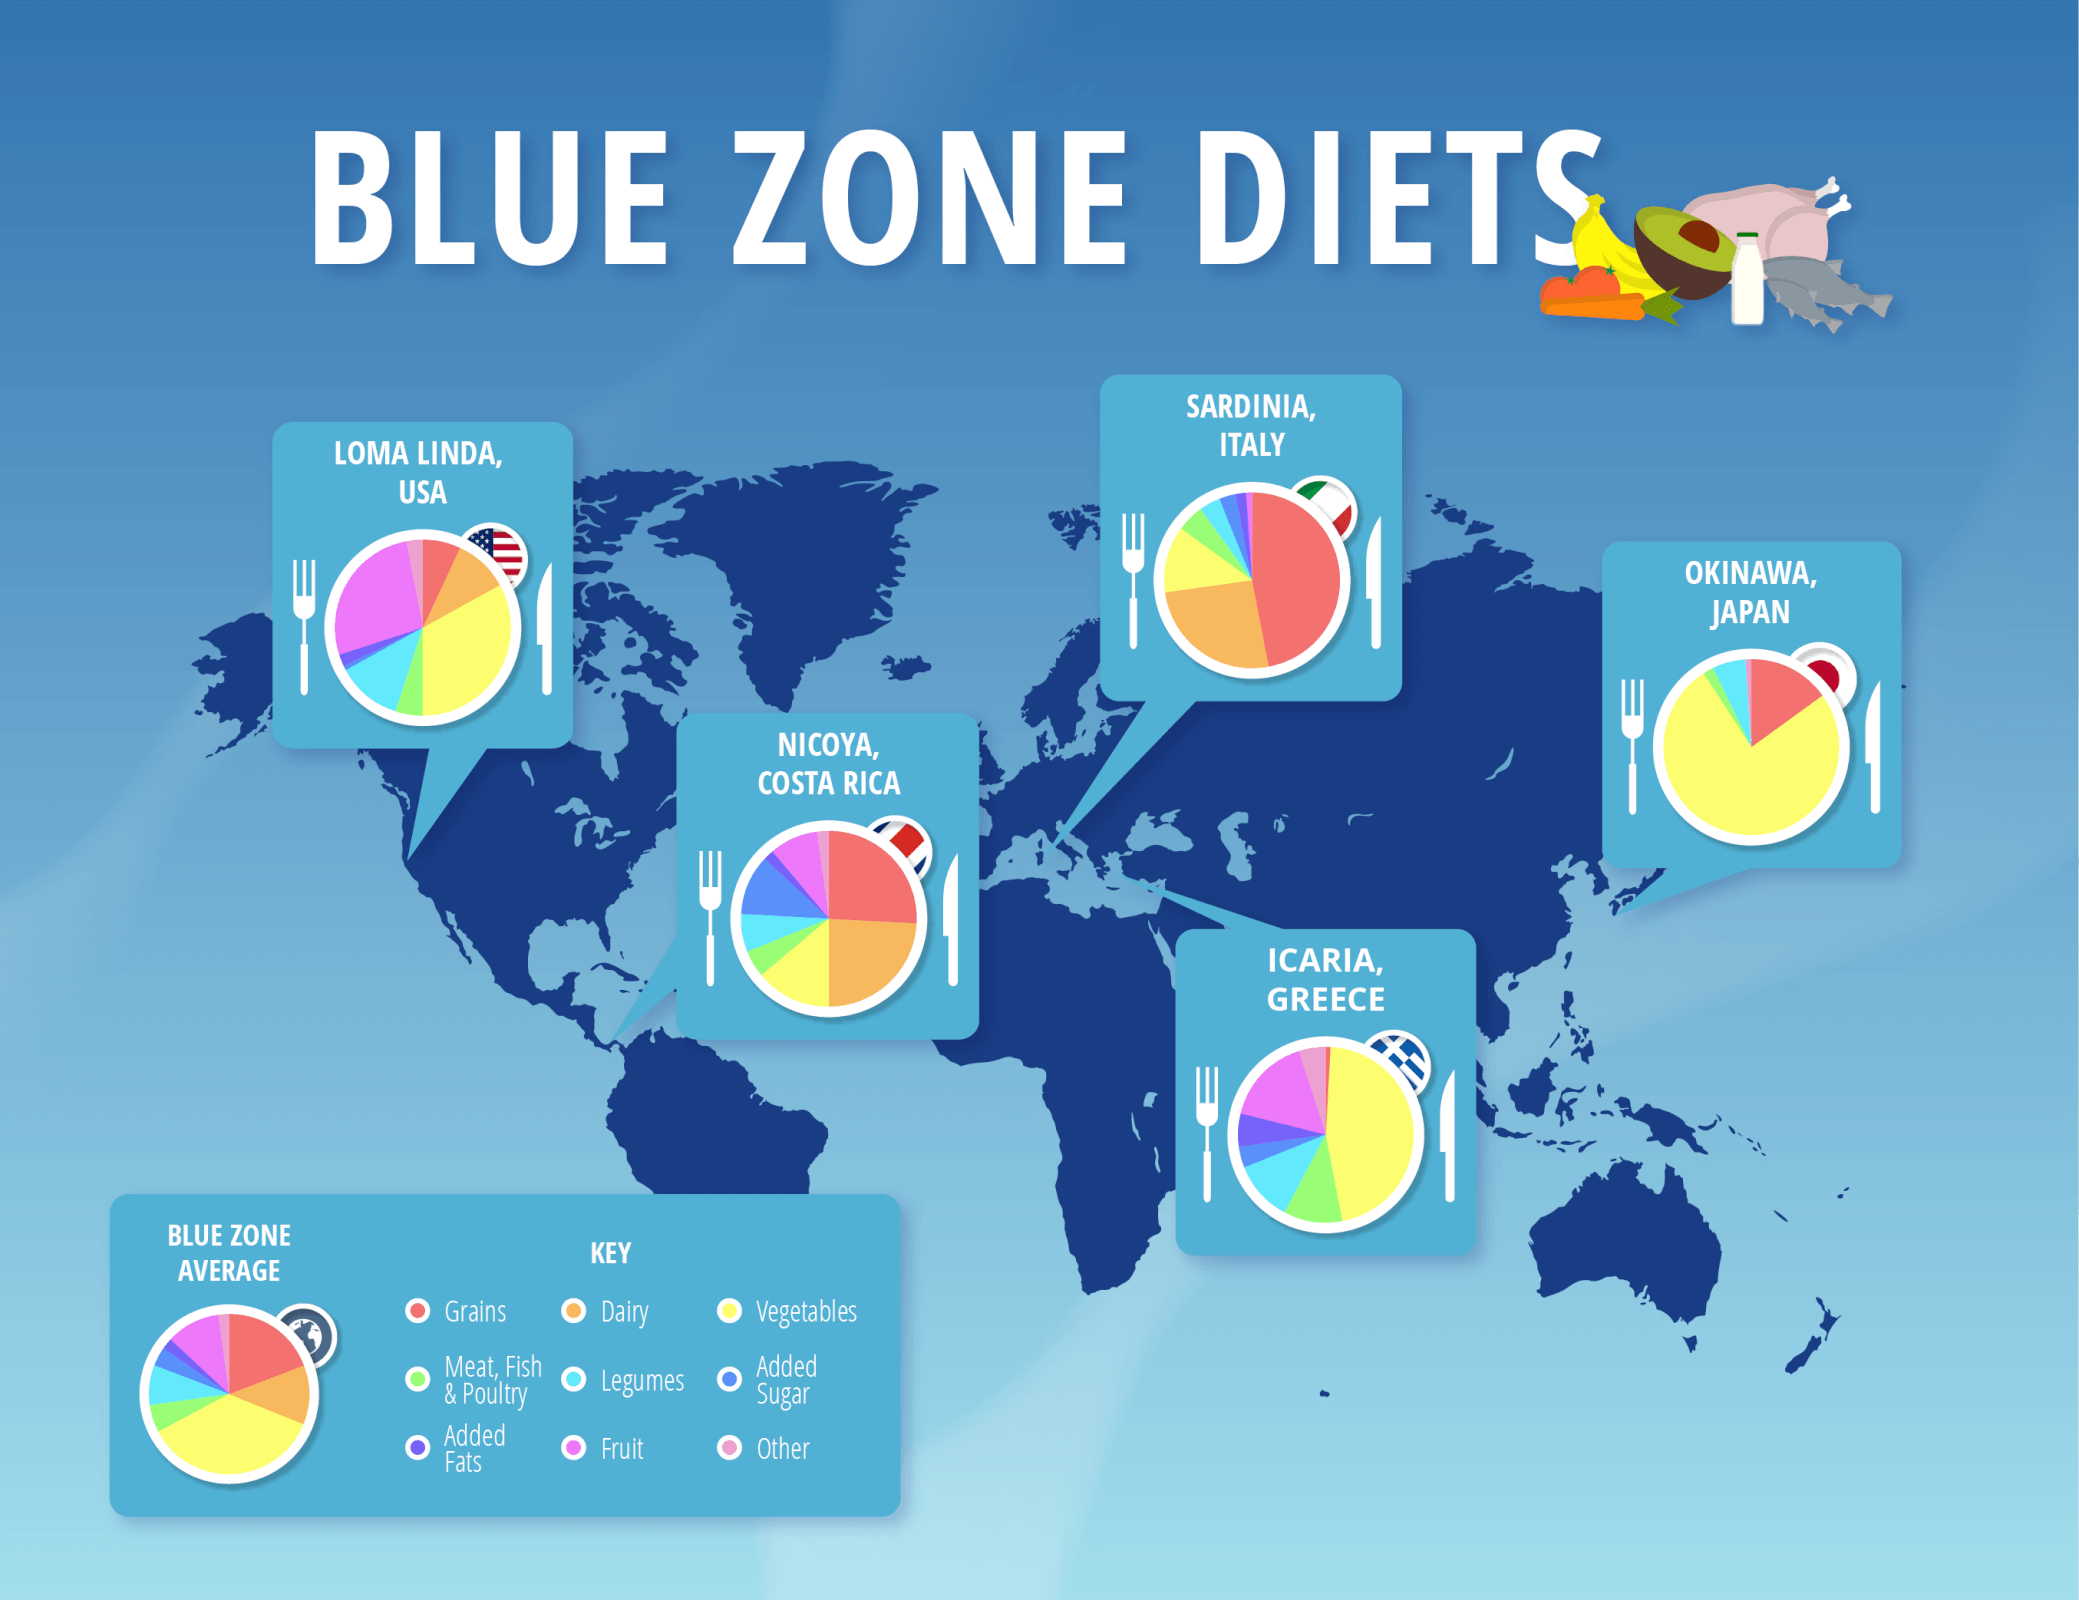 Map showing the locations and diet break downs of Blue Zone areas around the world.